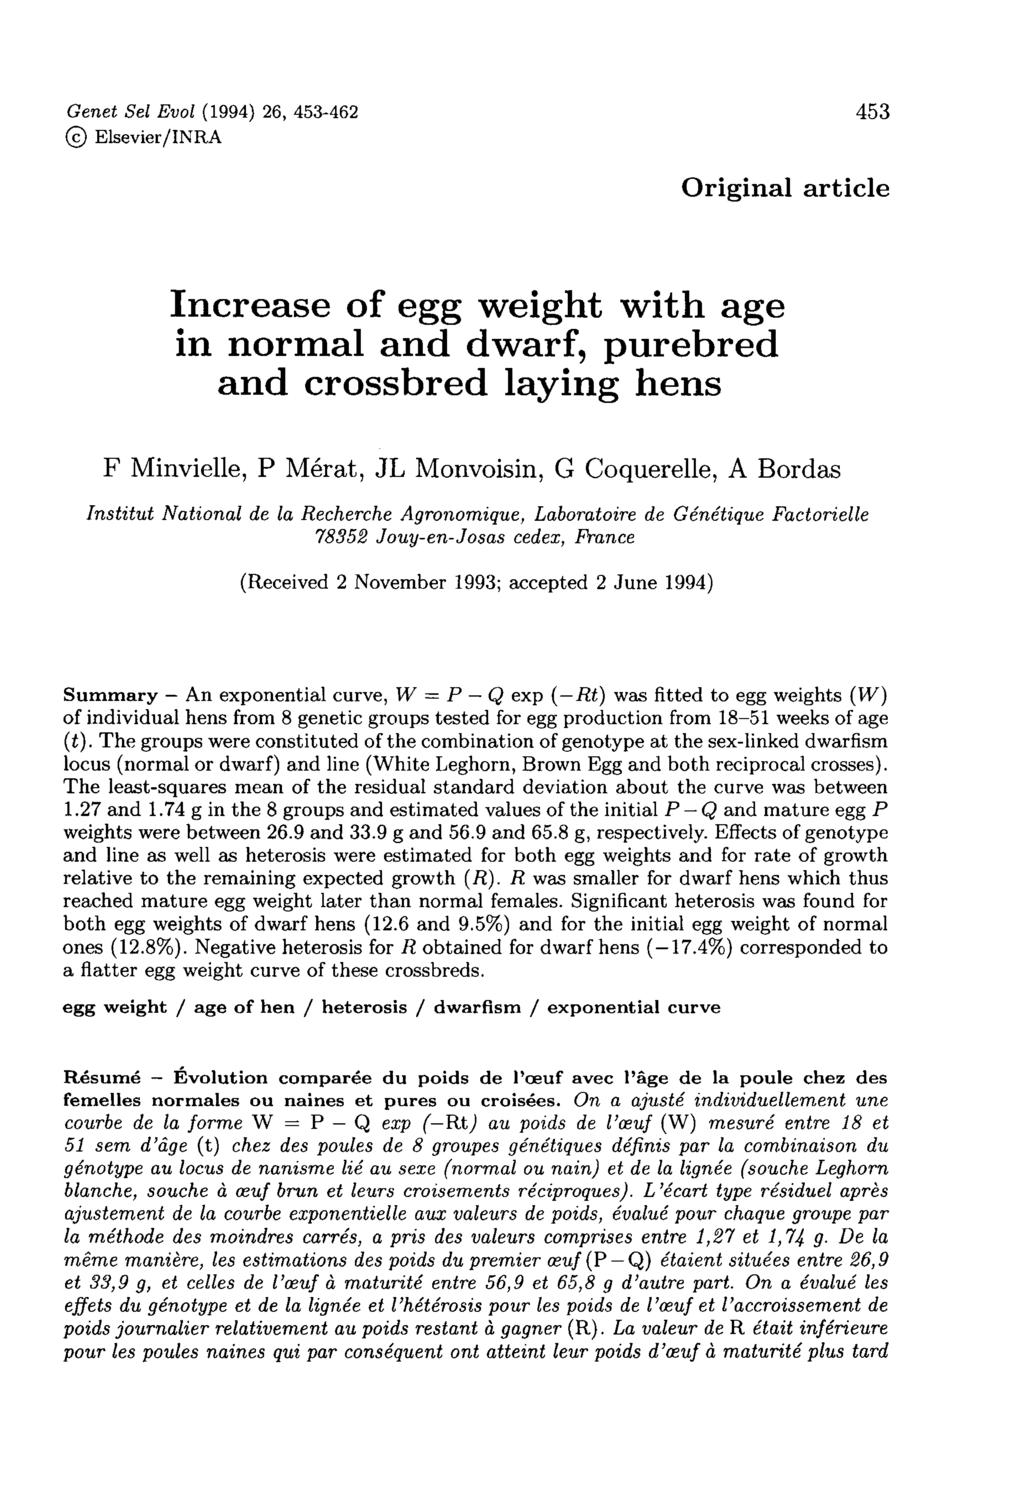 Original article Increase of egg weight with age in normal and dwarf, purebred and crossbred laying hens F Minvielle, P Mérat JL Monvoisin G Coquerelle, A Bordas Institut National de la Recherche